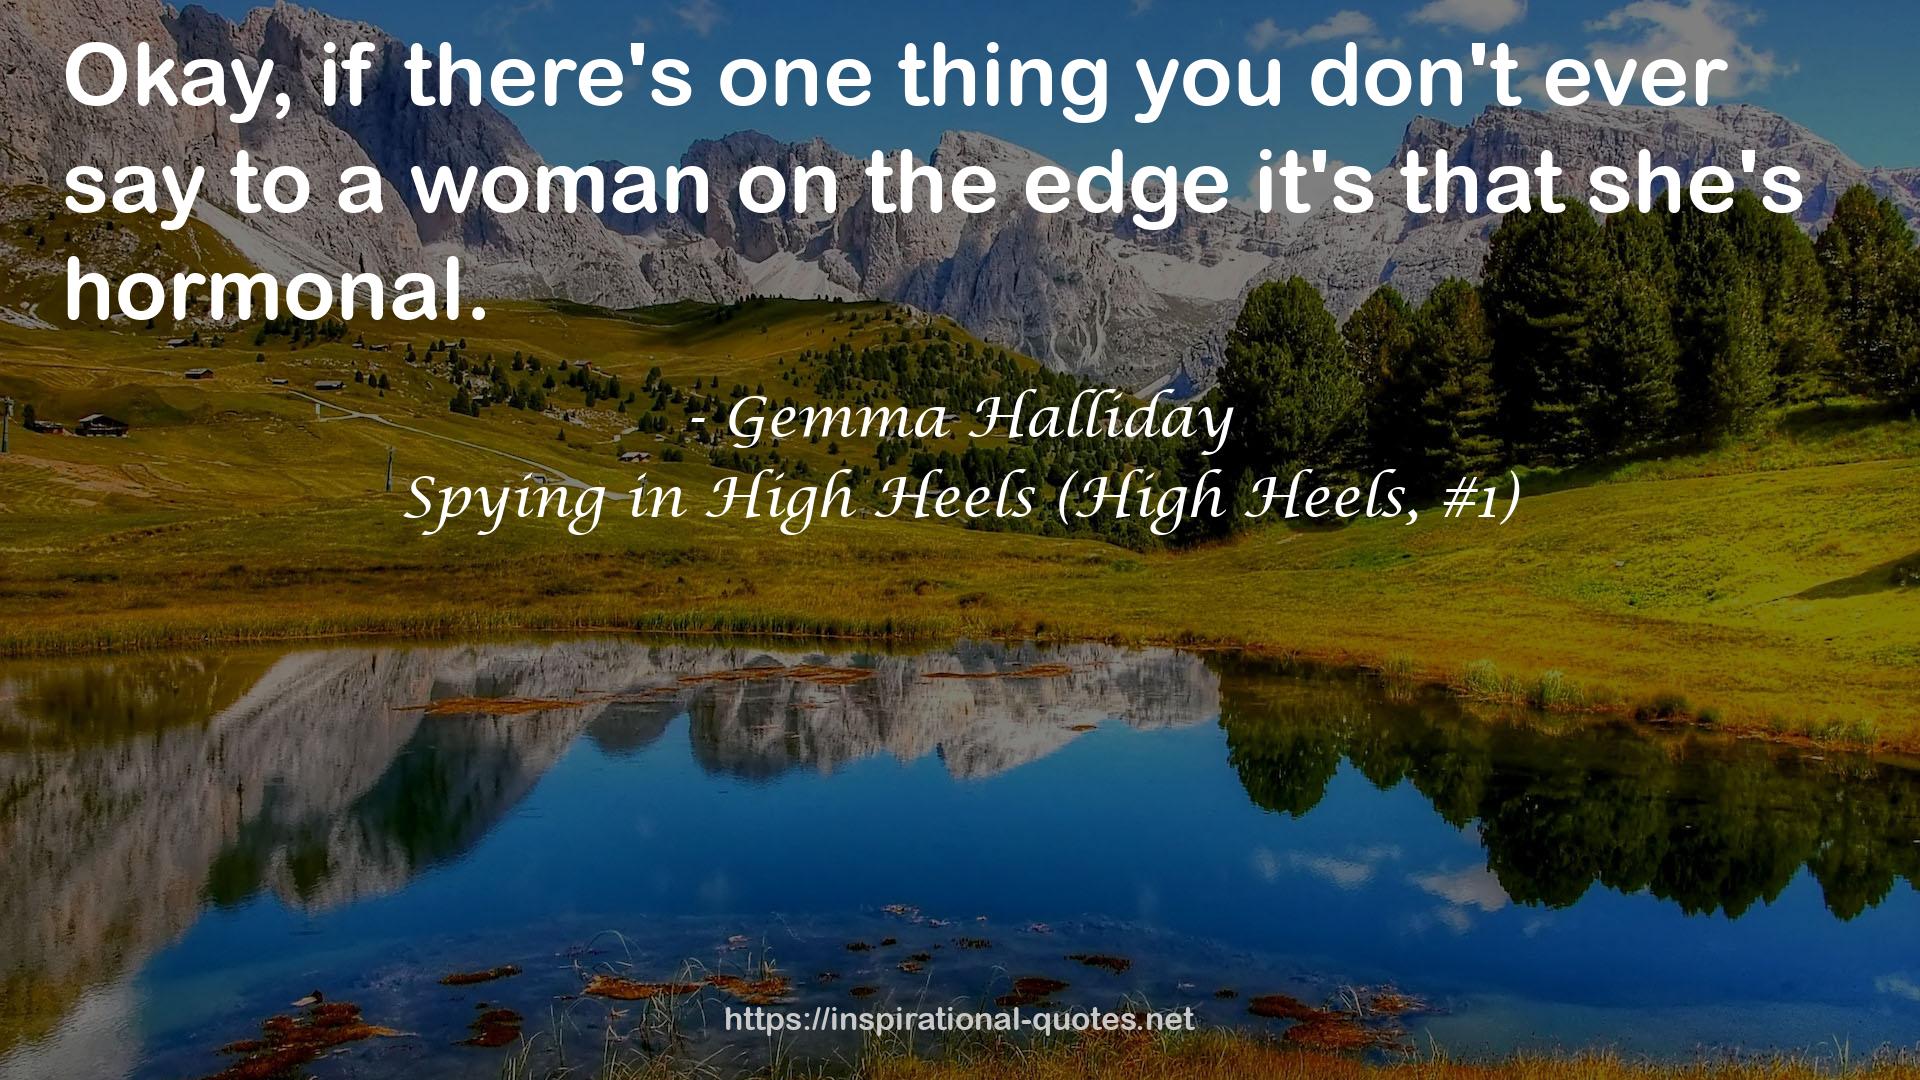 Spying in High Heels (High Heels, #1) QUOTES